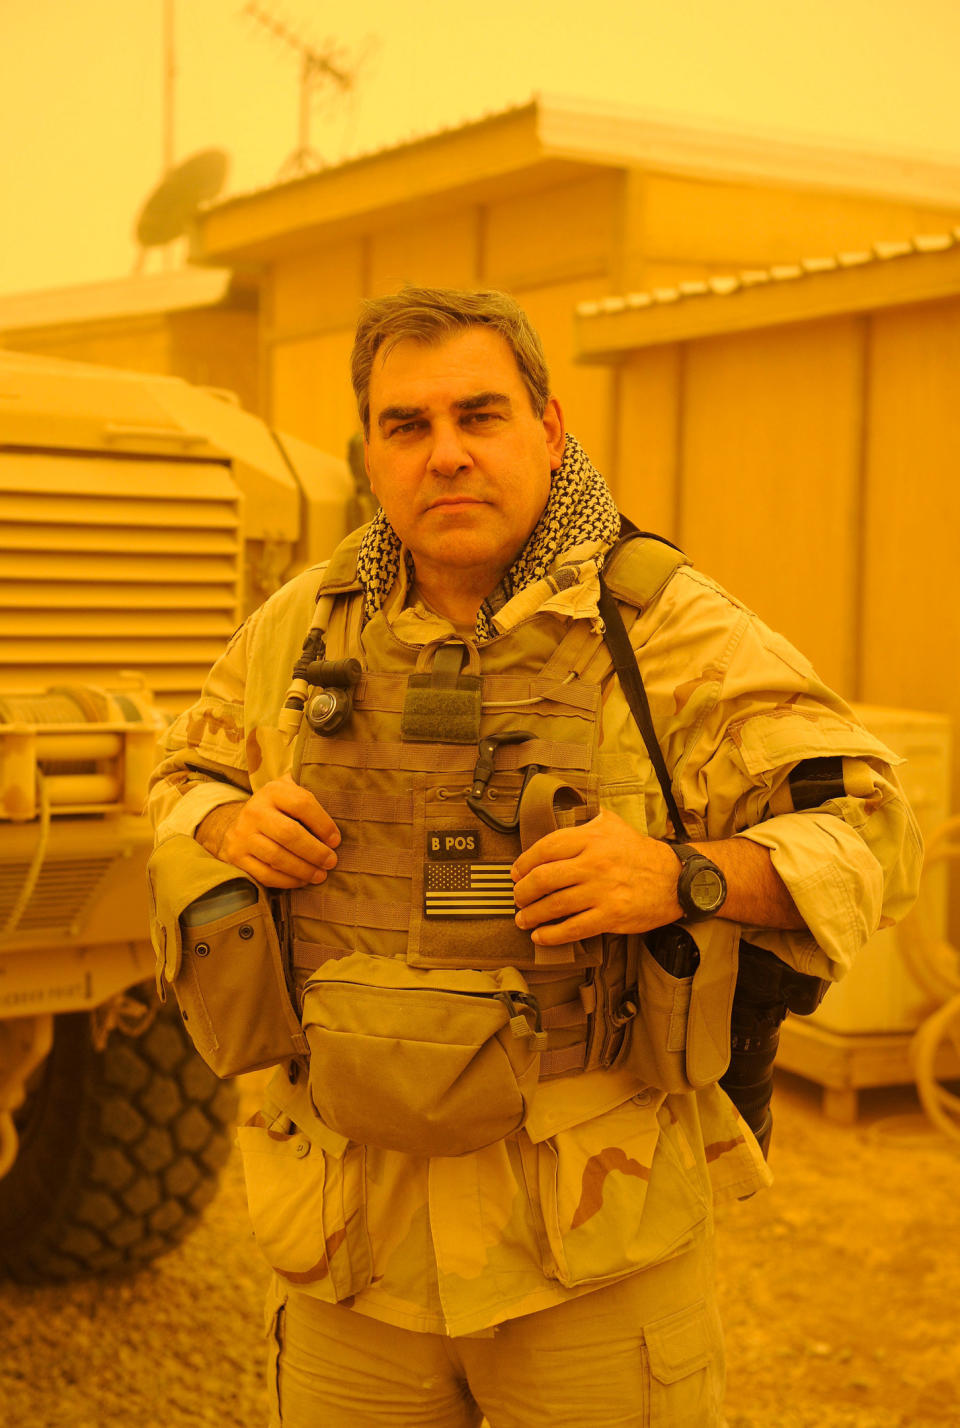 Author and photographer, Greg E. Mathieson Sr. stands in a dust storm at the secluded US Navy SEAL base in Fallujah, Iraq while producing exclusive material for the newly released book, US Naval Special Warfare / US Navy SEALs.